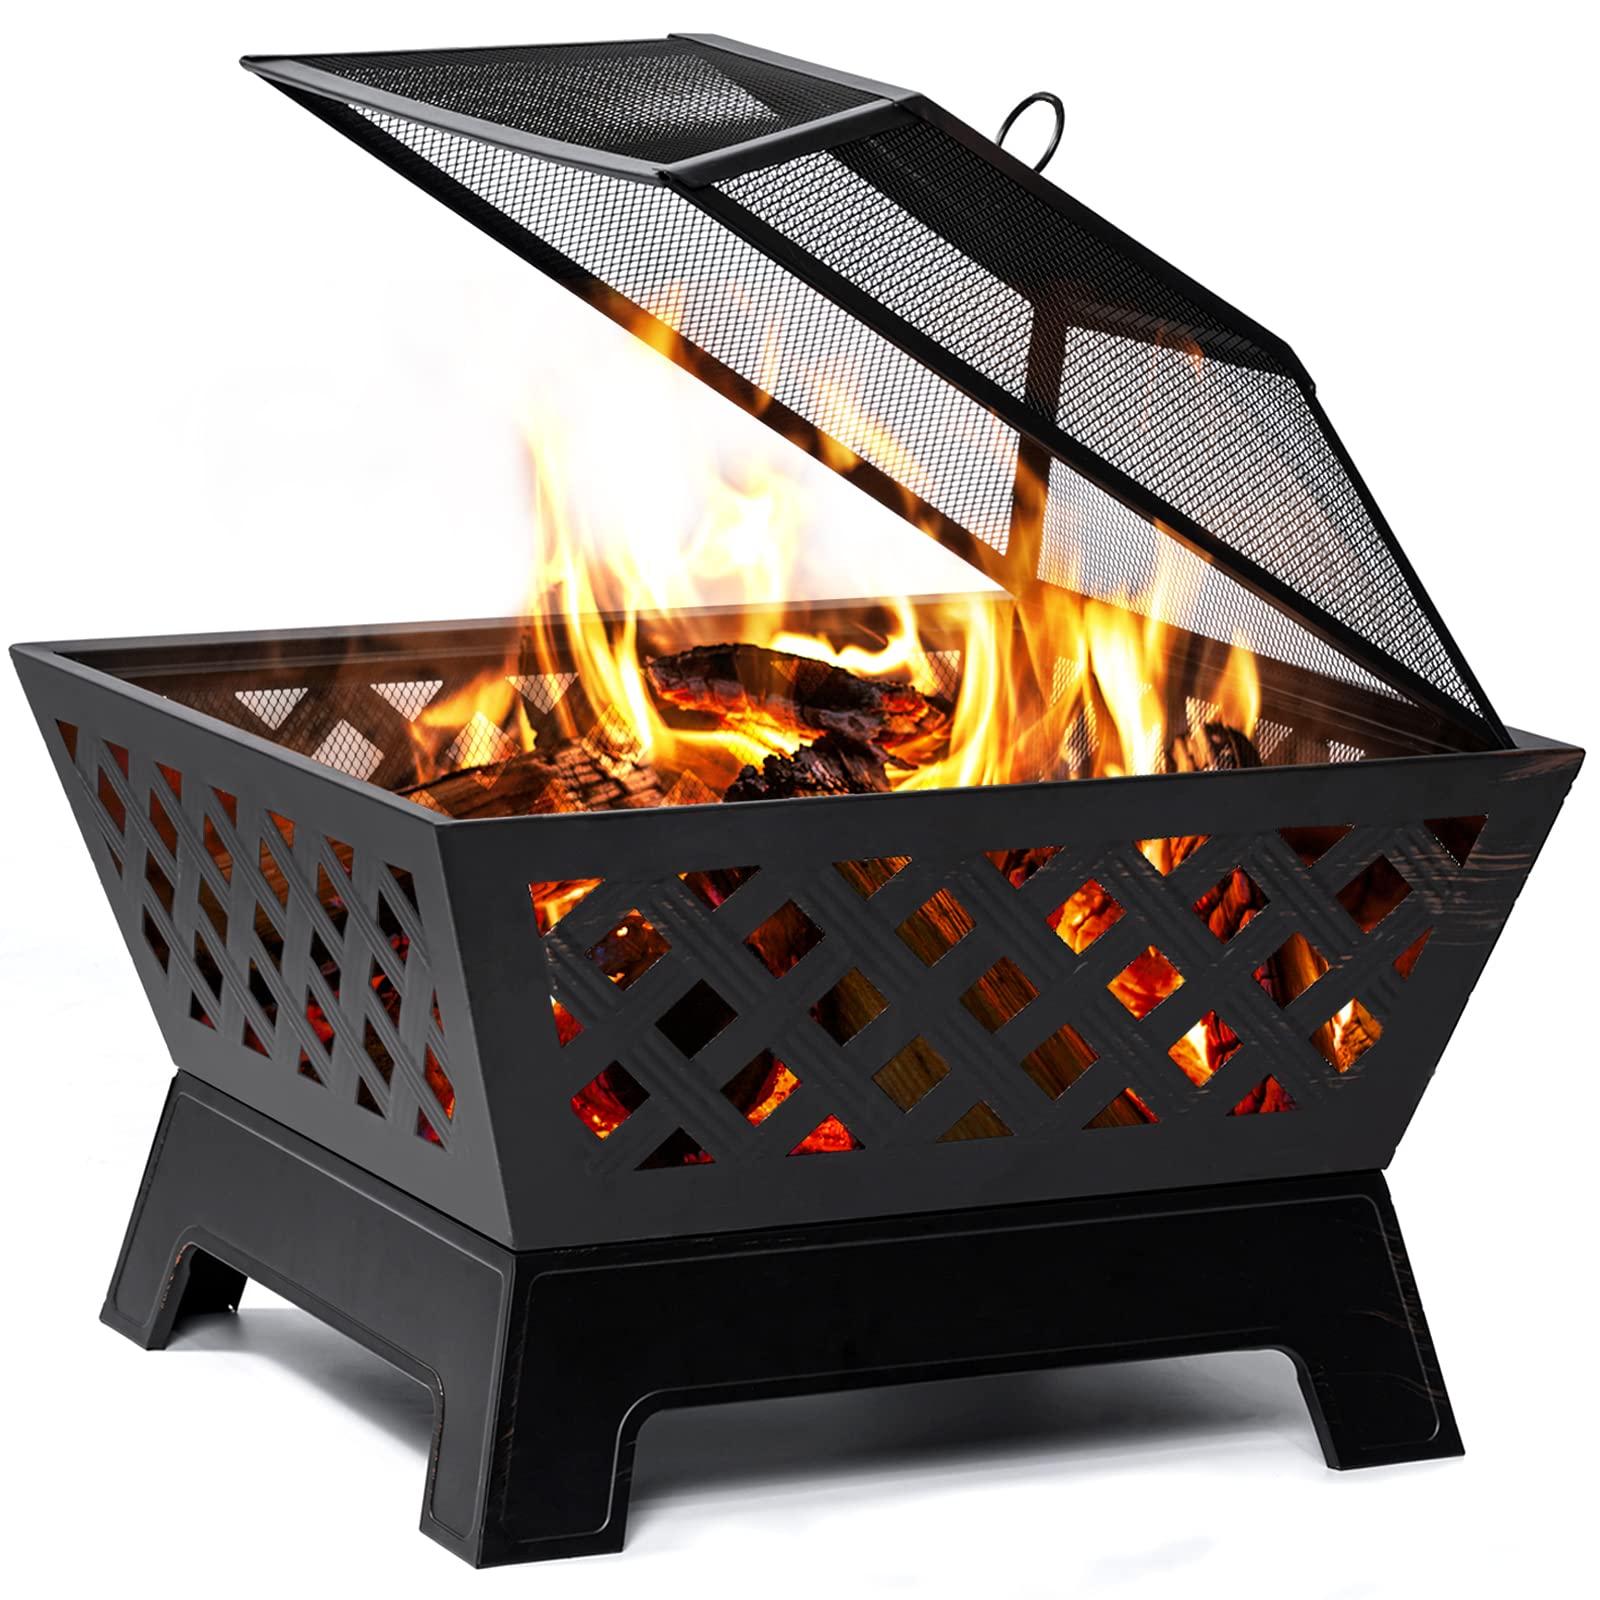 SINGLYFIRE 34 Inch Fire Pits for Outside Extra Large Wood Burning Fire Pit Rectangular Deep Bowl Outdoor Steel Firepits with Ash Plate,Water Drainage Hole,Spark Screen,Poker for Backyard Bonfire